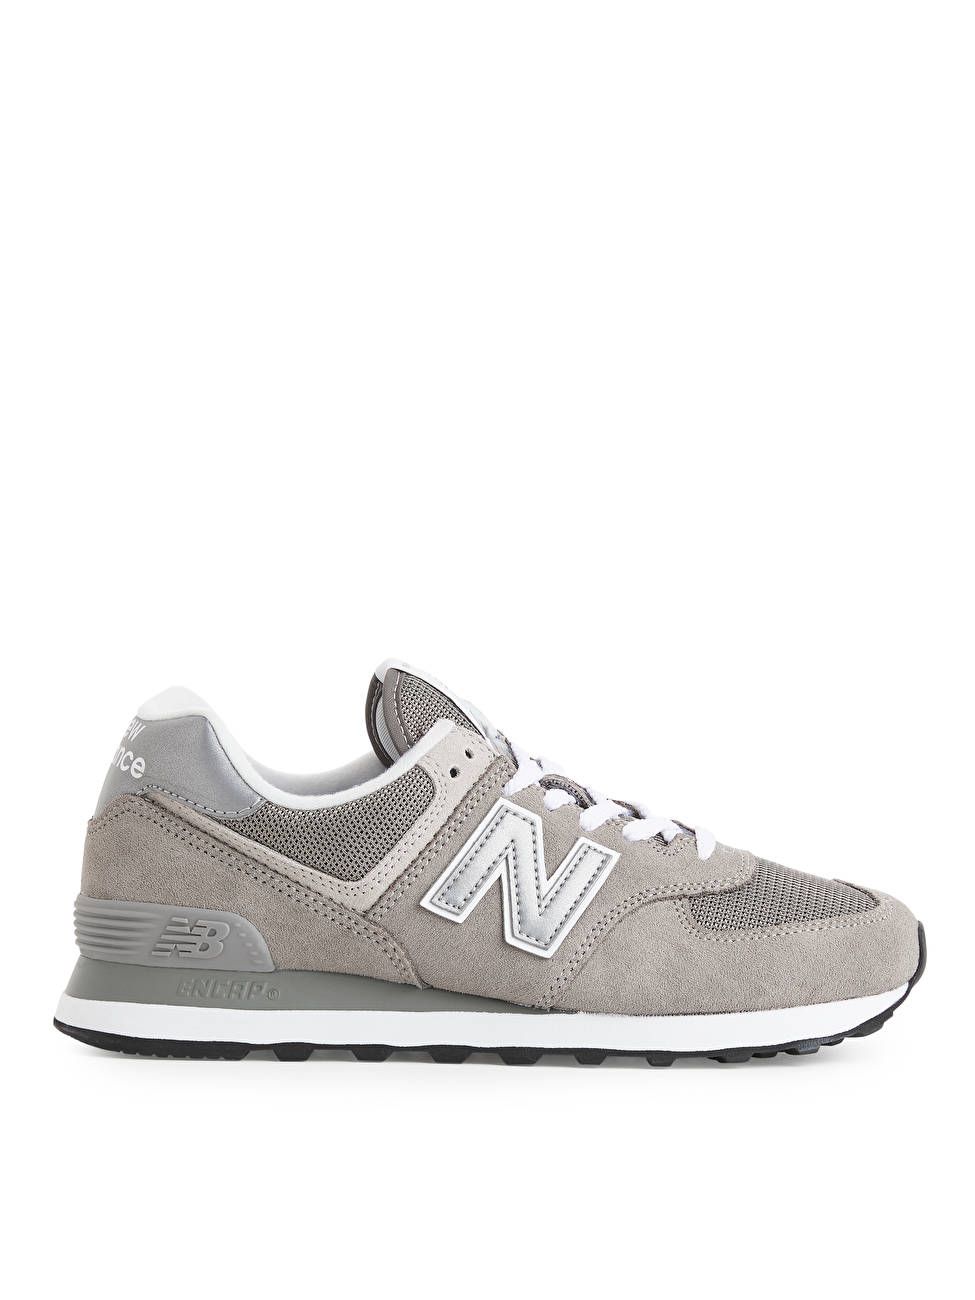 New Balance 574 Trainers - Grey - Shoes - ARKET AT | ARKET